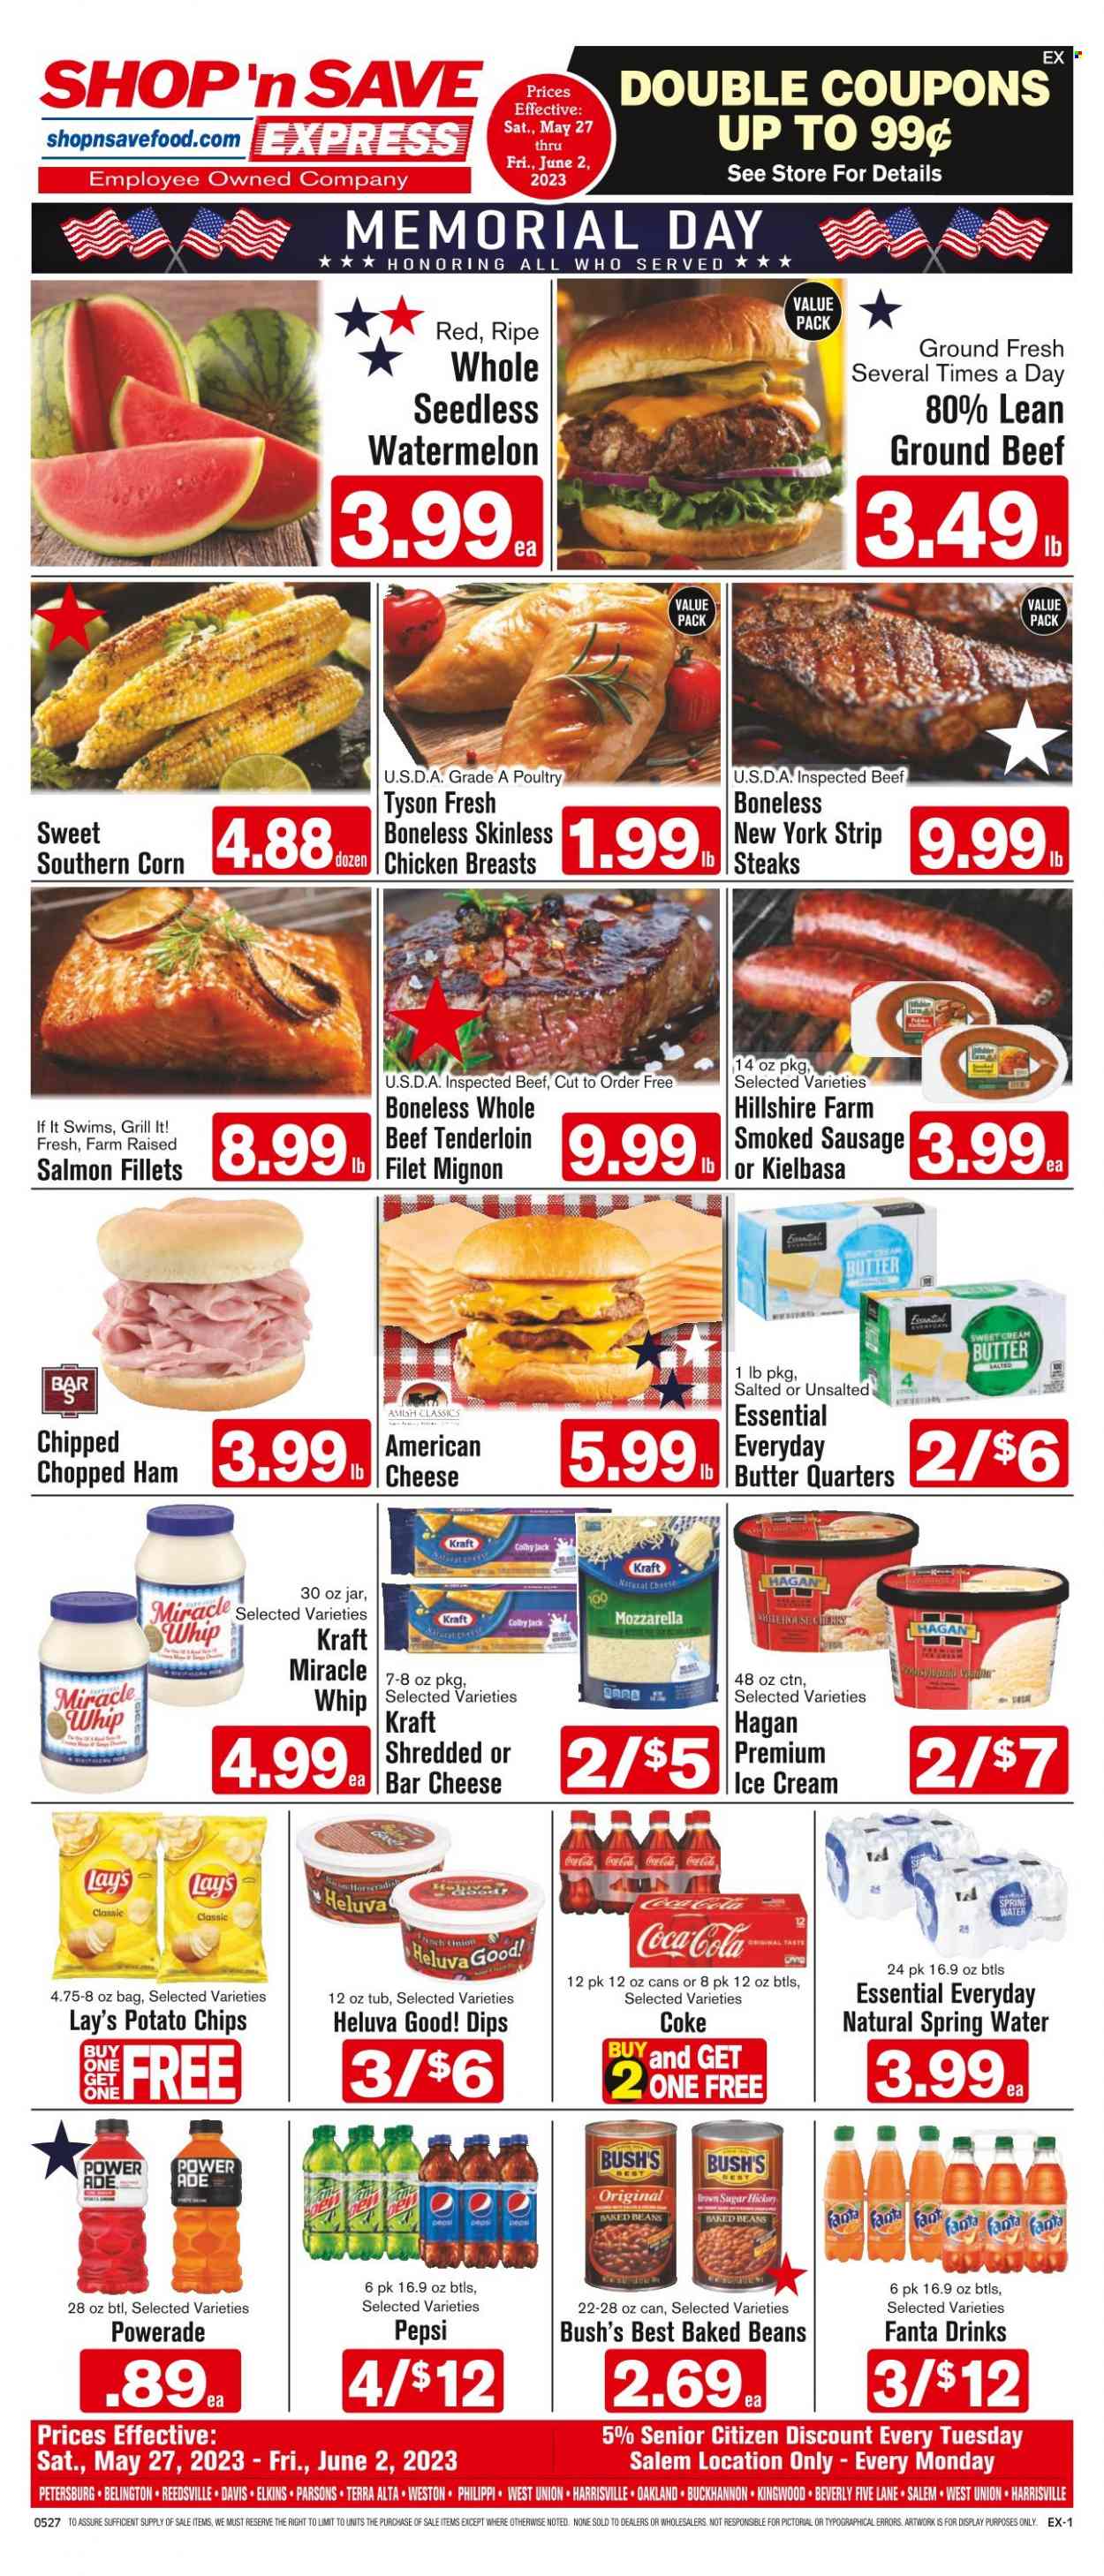 thumbnail - Shop ‘n Save Express Flyer - 05/27/2023 - 06/02/2023 - Sales products - beans, corn, onion, watermelon, cherries, chicken breasts, chicken, beef meat, ground beef, steak, beef tenderloin, salmon, salmon fillet, Kraft®, ready meal, ham, Hillshire Farm, smoked sausage, Colby cheese, mozzarella, cheese, Miracle Whip, ice cream, potato chips, chips, Lay’s, cane sugar, baked beans, Coca-Cola, Powerade, Pepsi, Fanta, energy drink, soft drink, Coke, spring water, water. Page 1.